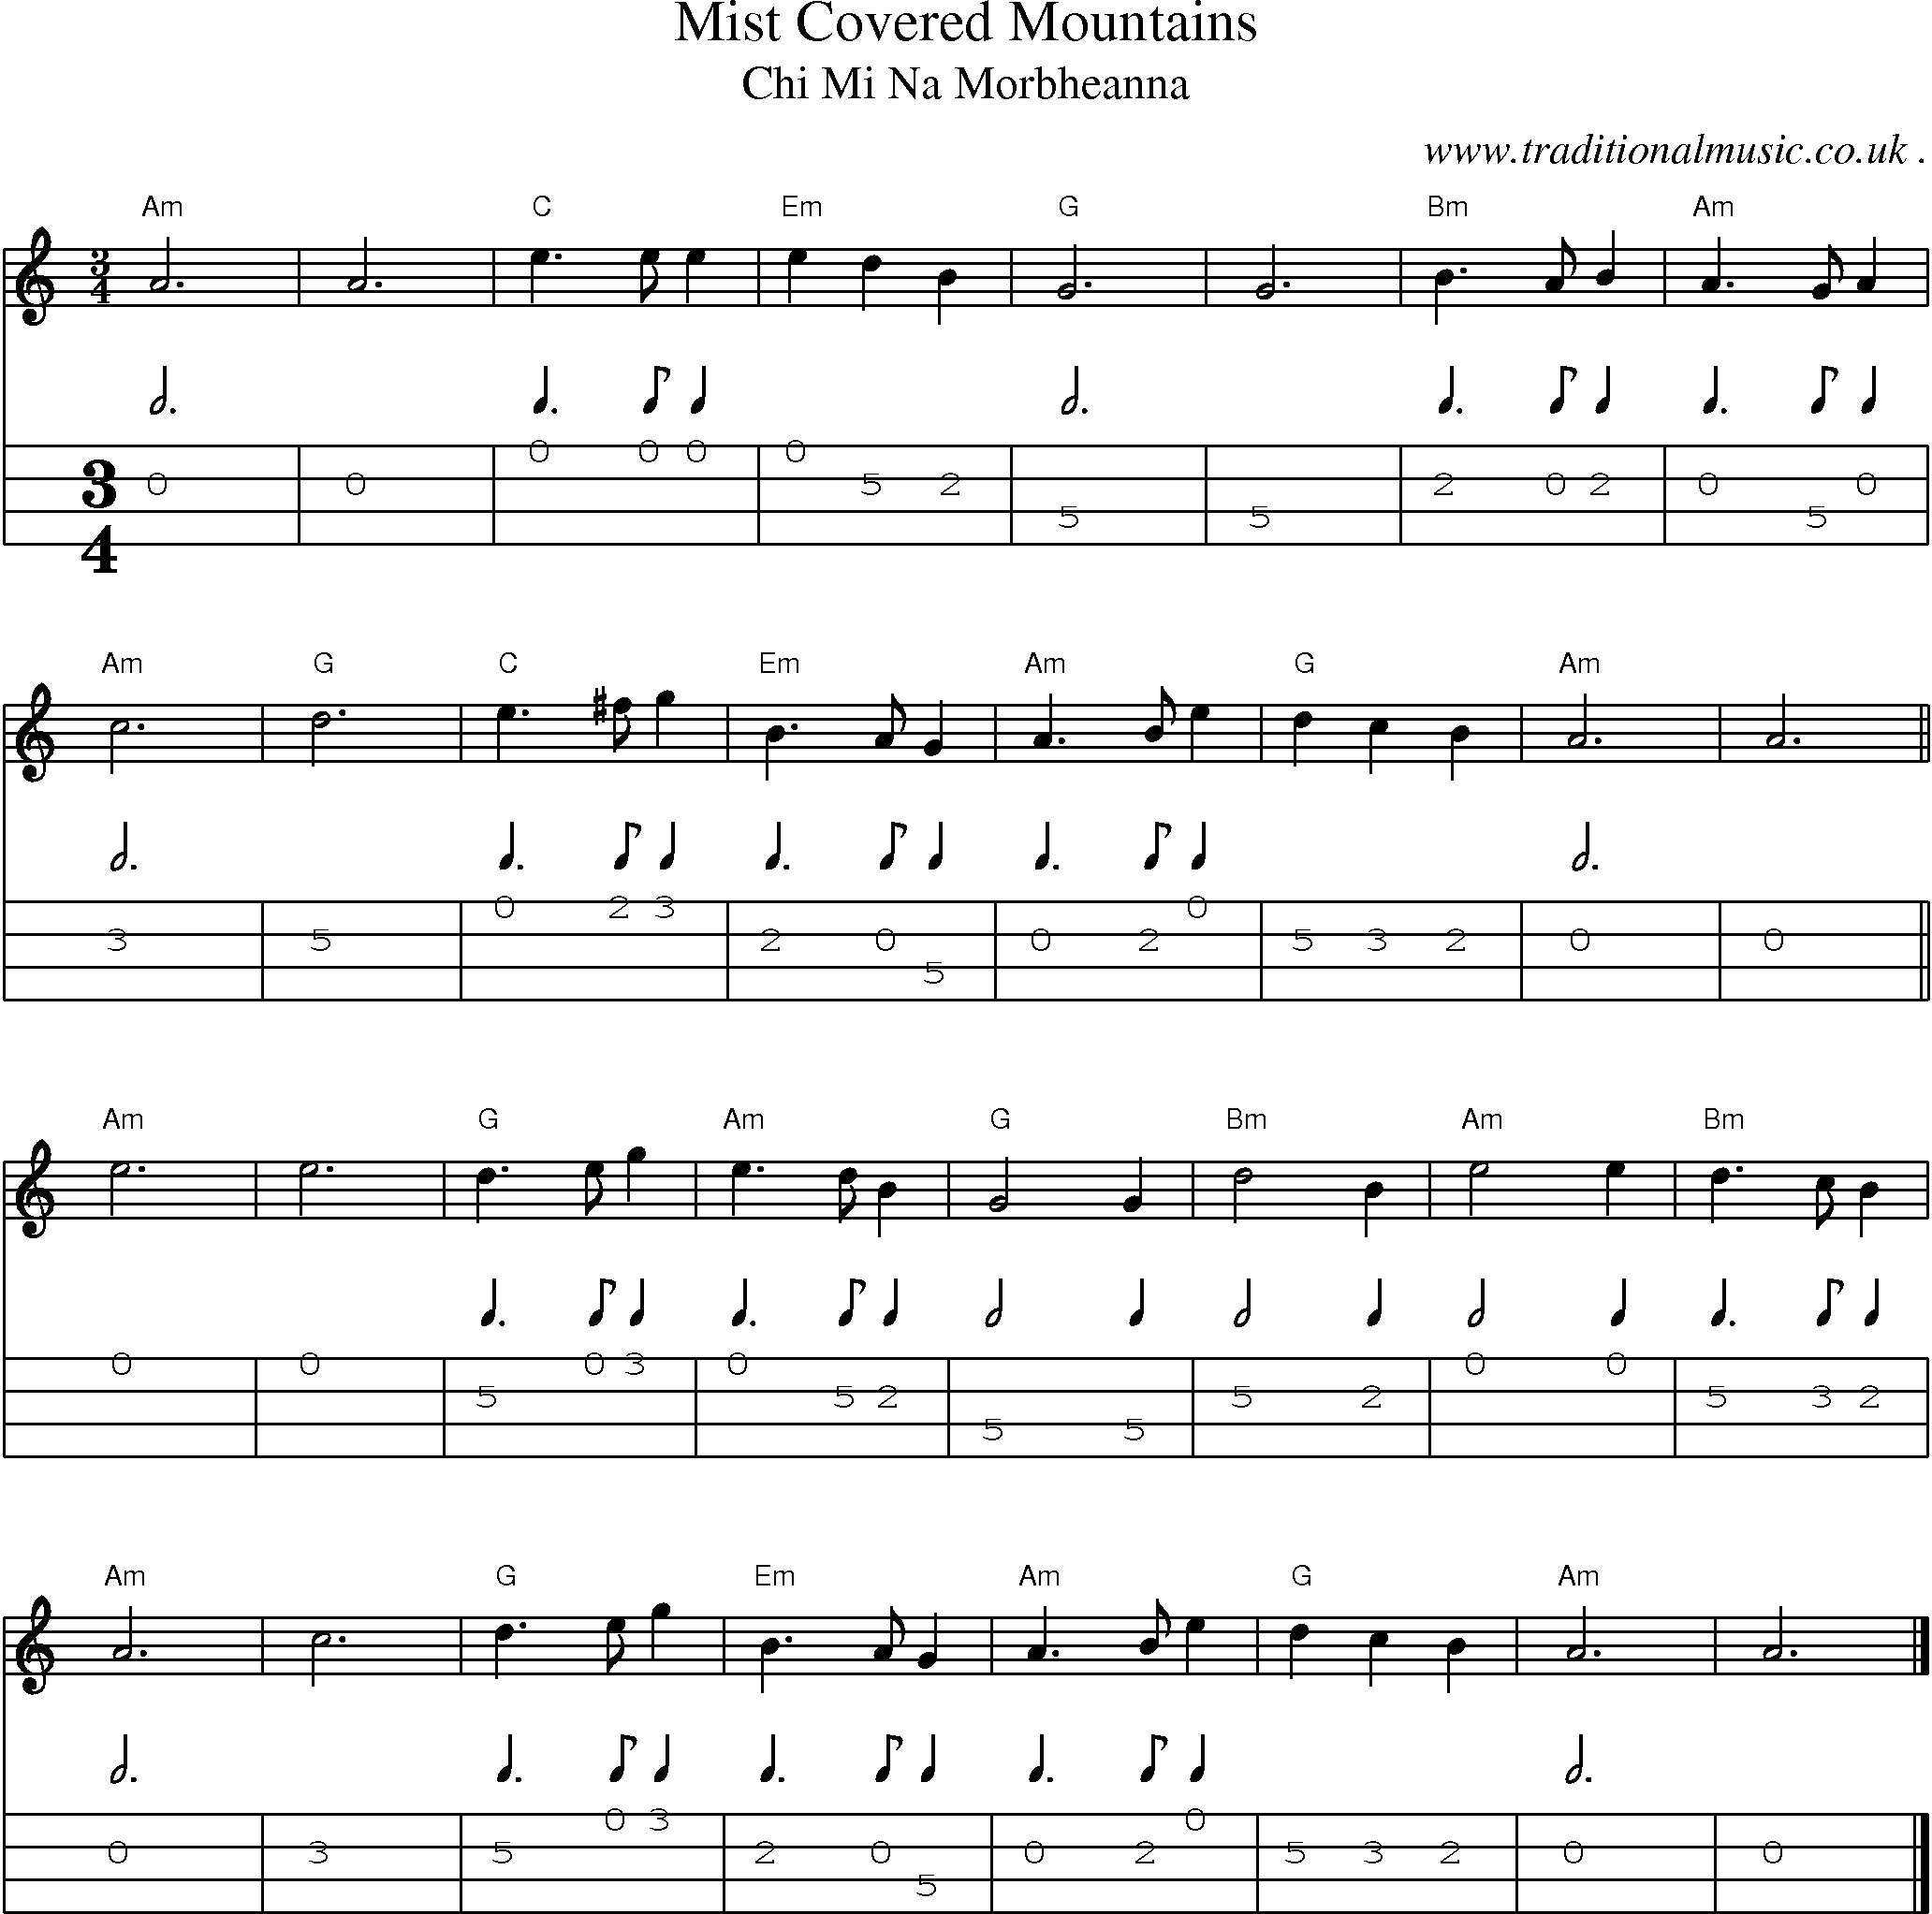 Music Score and Guitar Tabs for Mist Covered Mountains